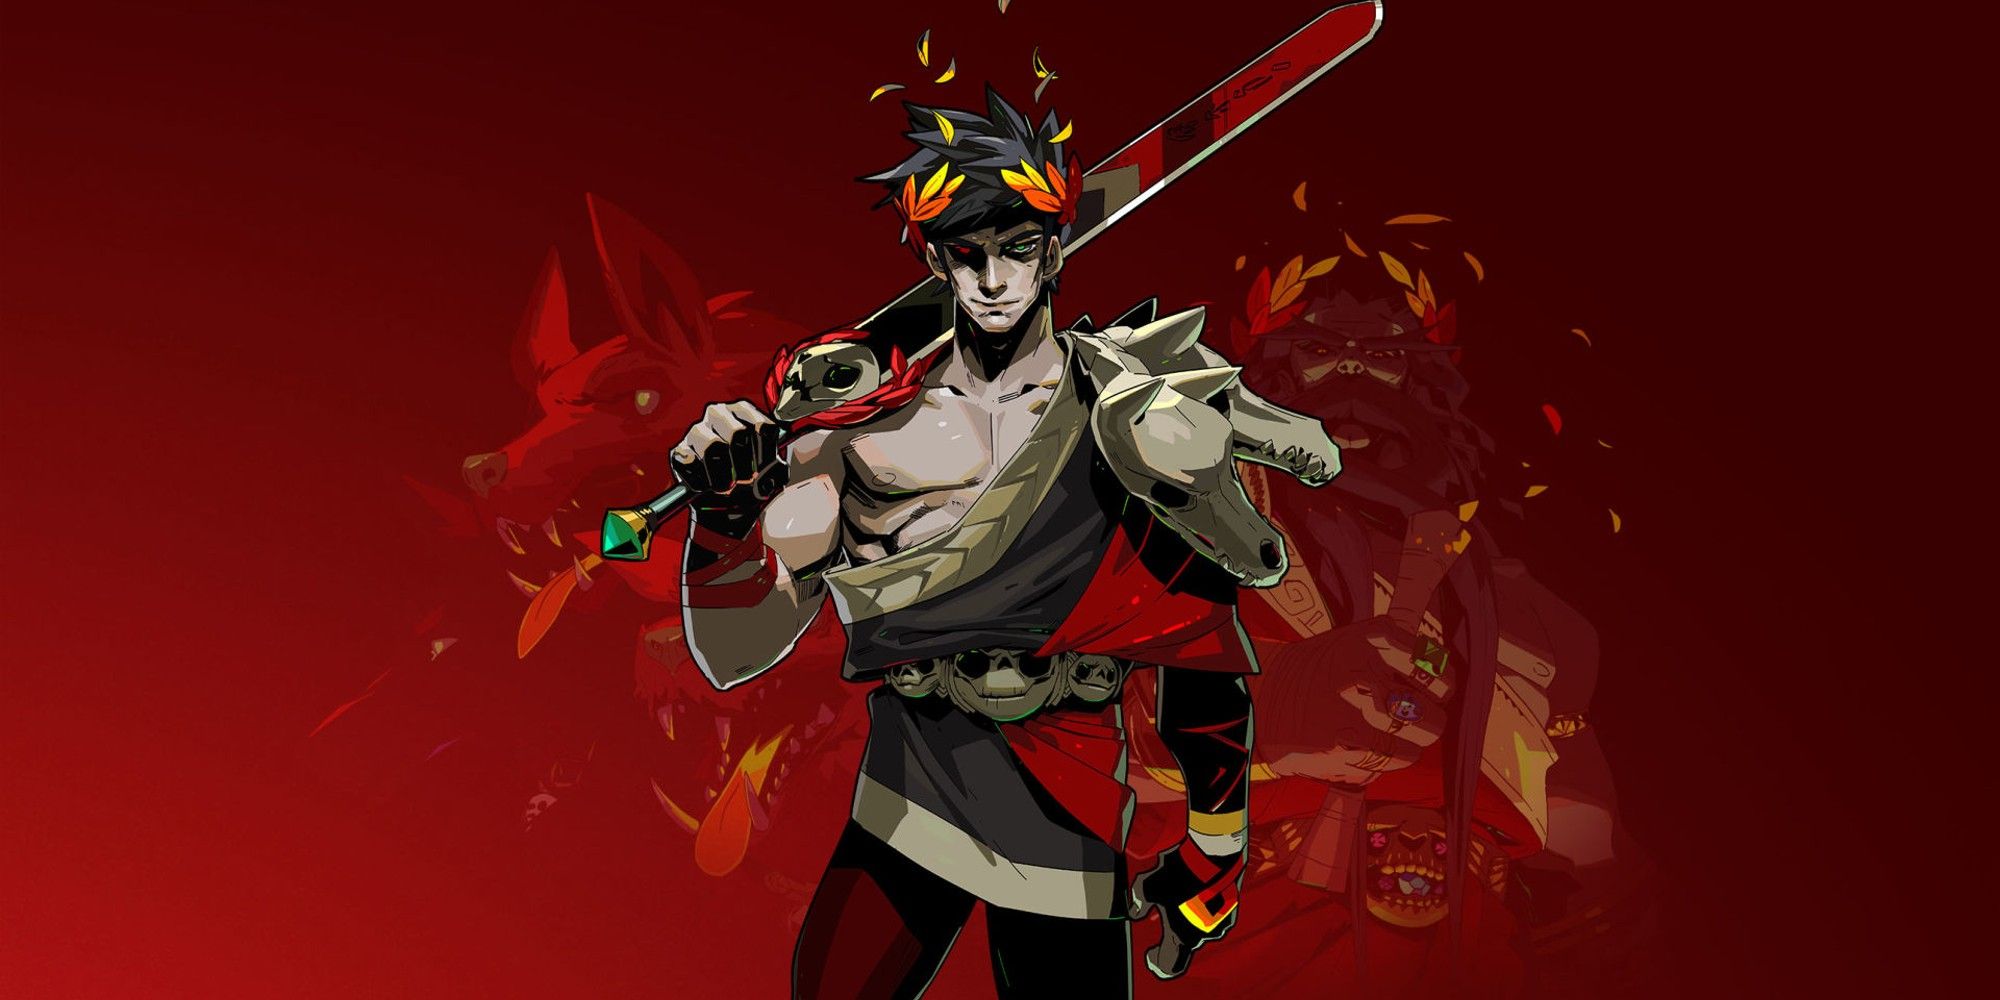 Zagreus standing against a picture of his father Hades.